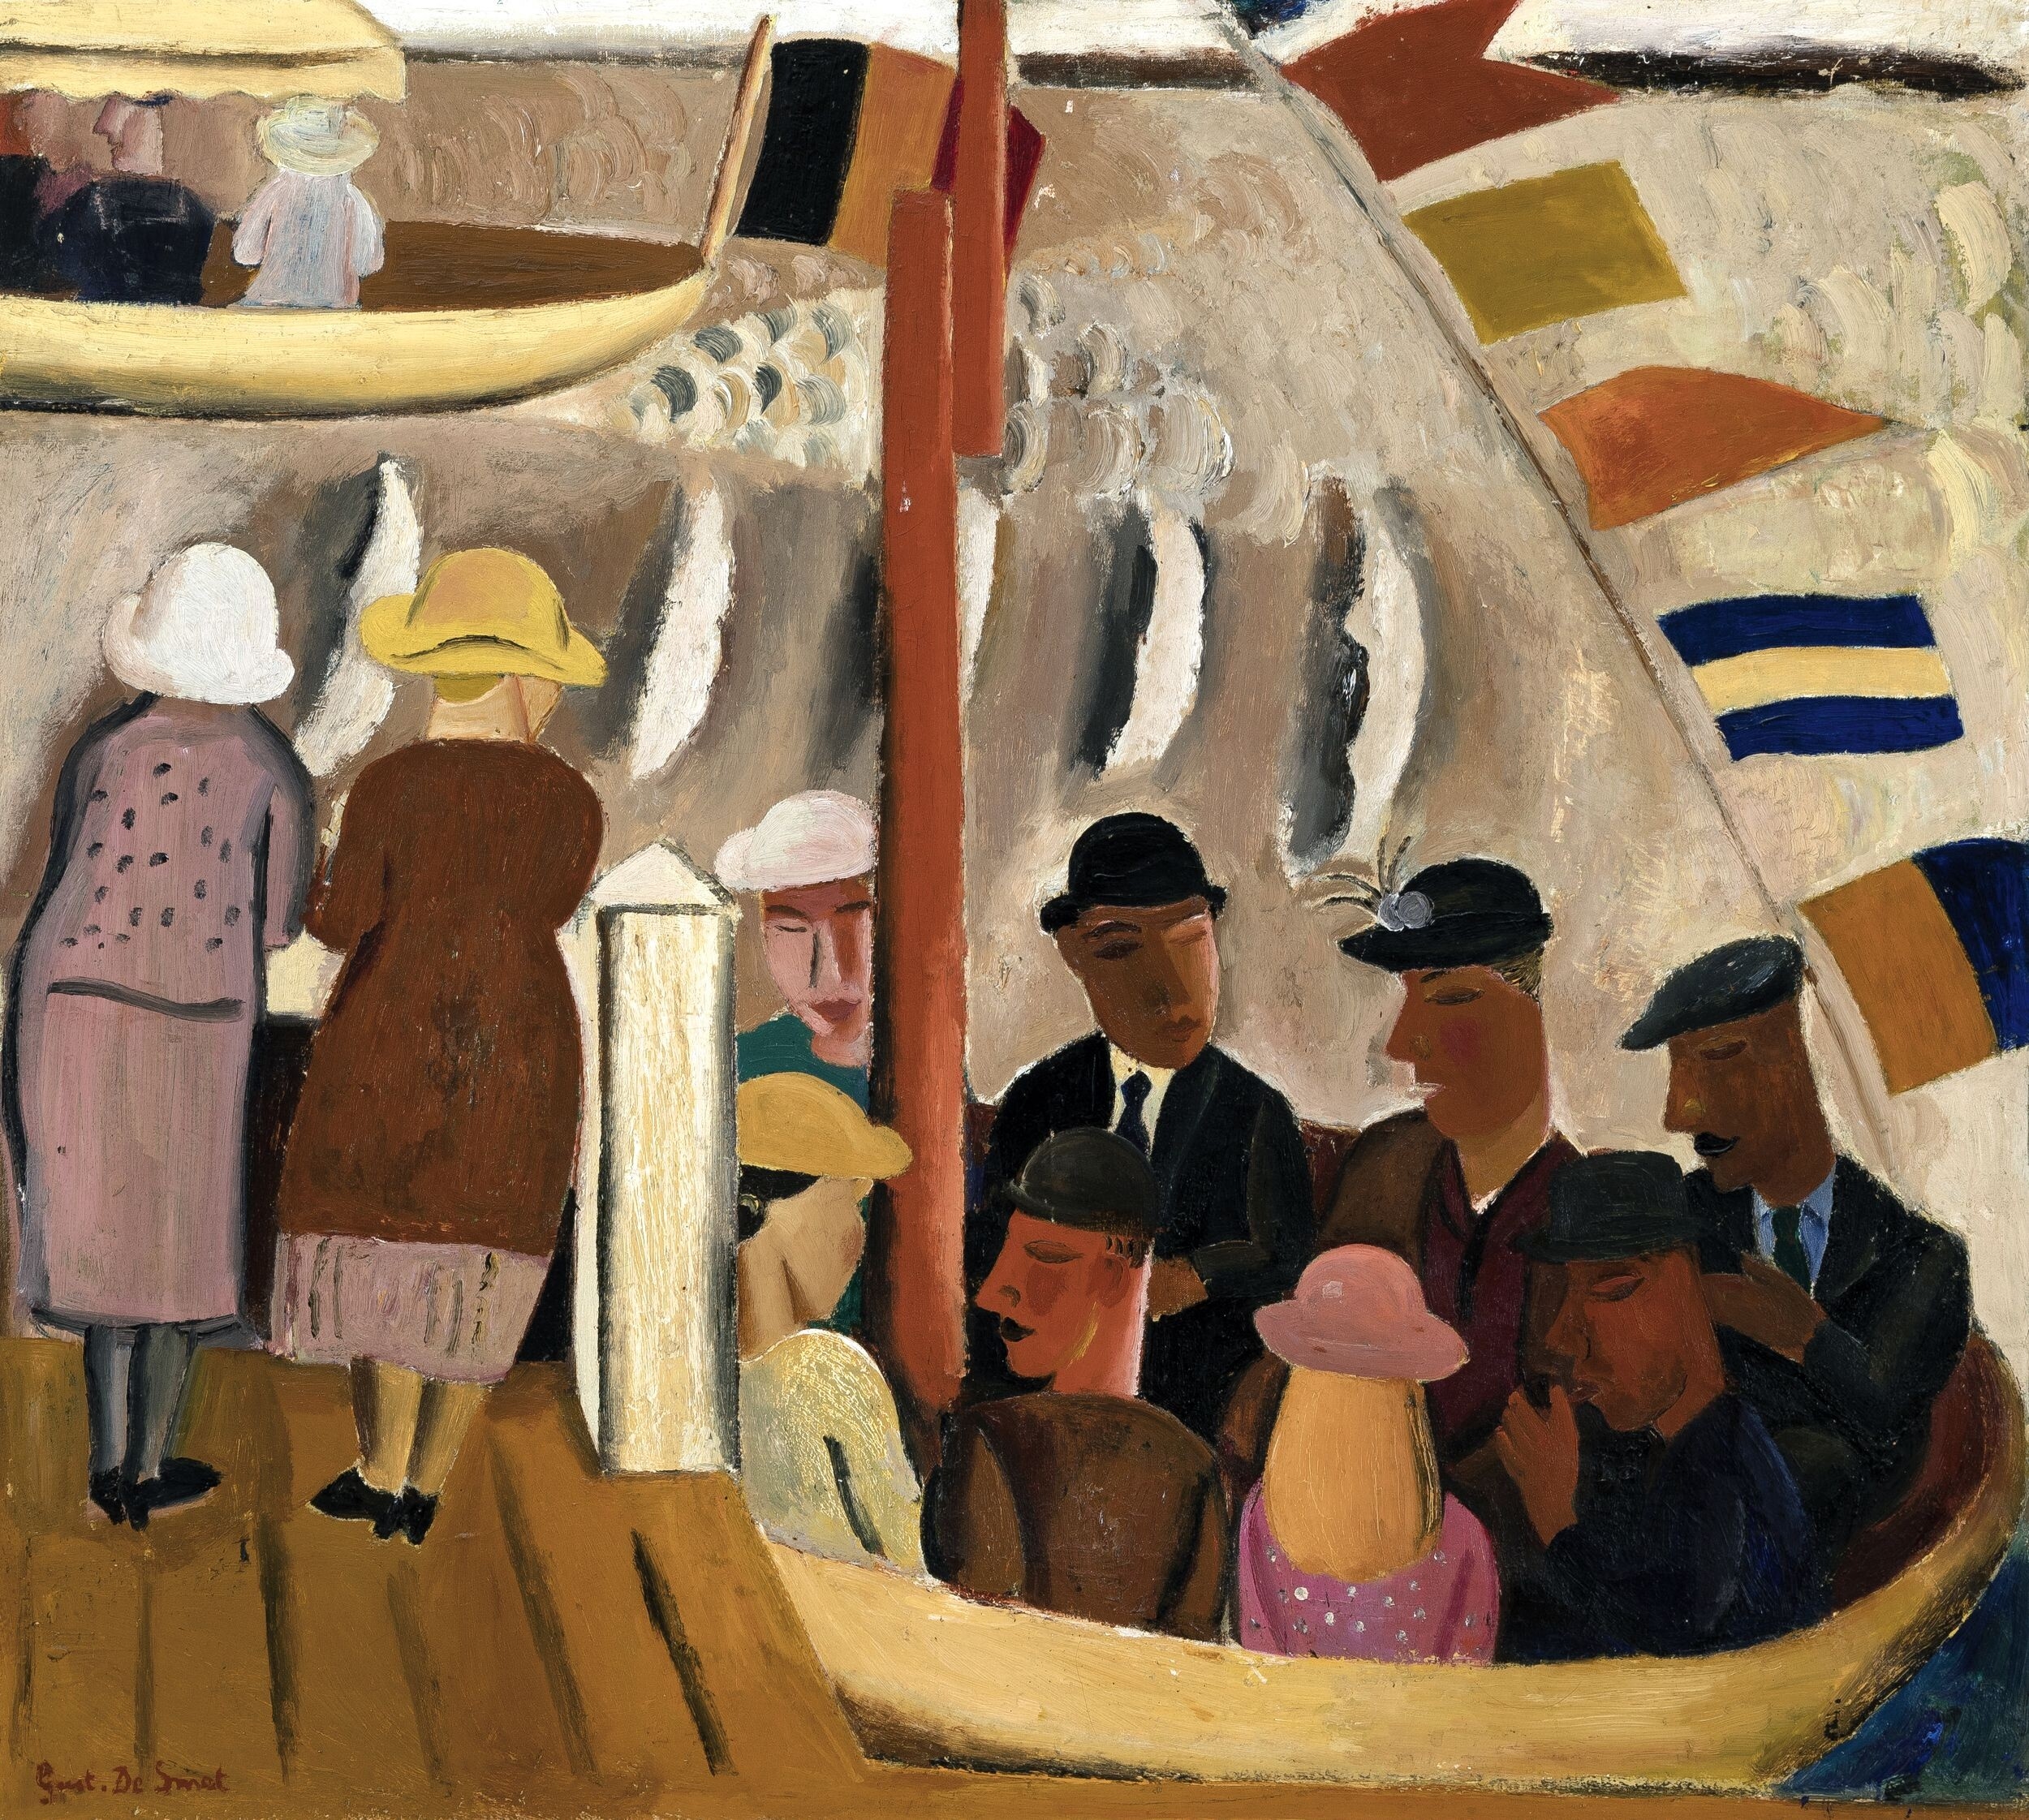 Artwork by Gustave de Smet, The pleasure boat, Made of Oil on canvas